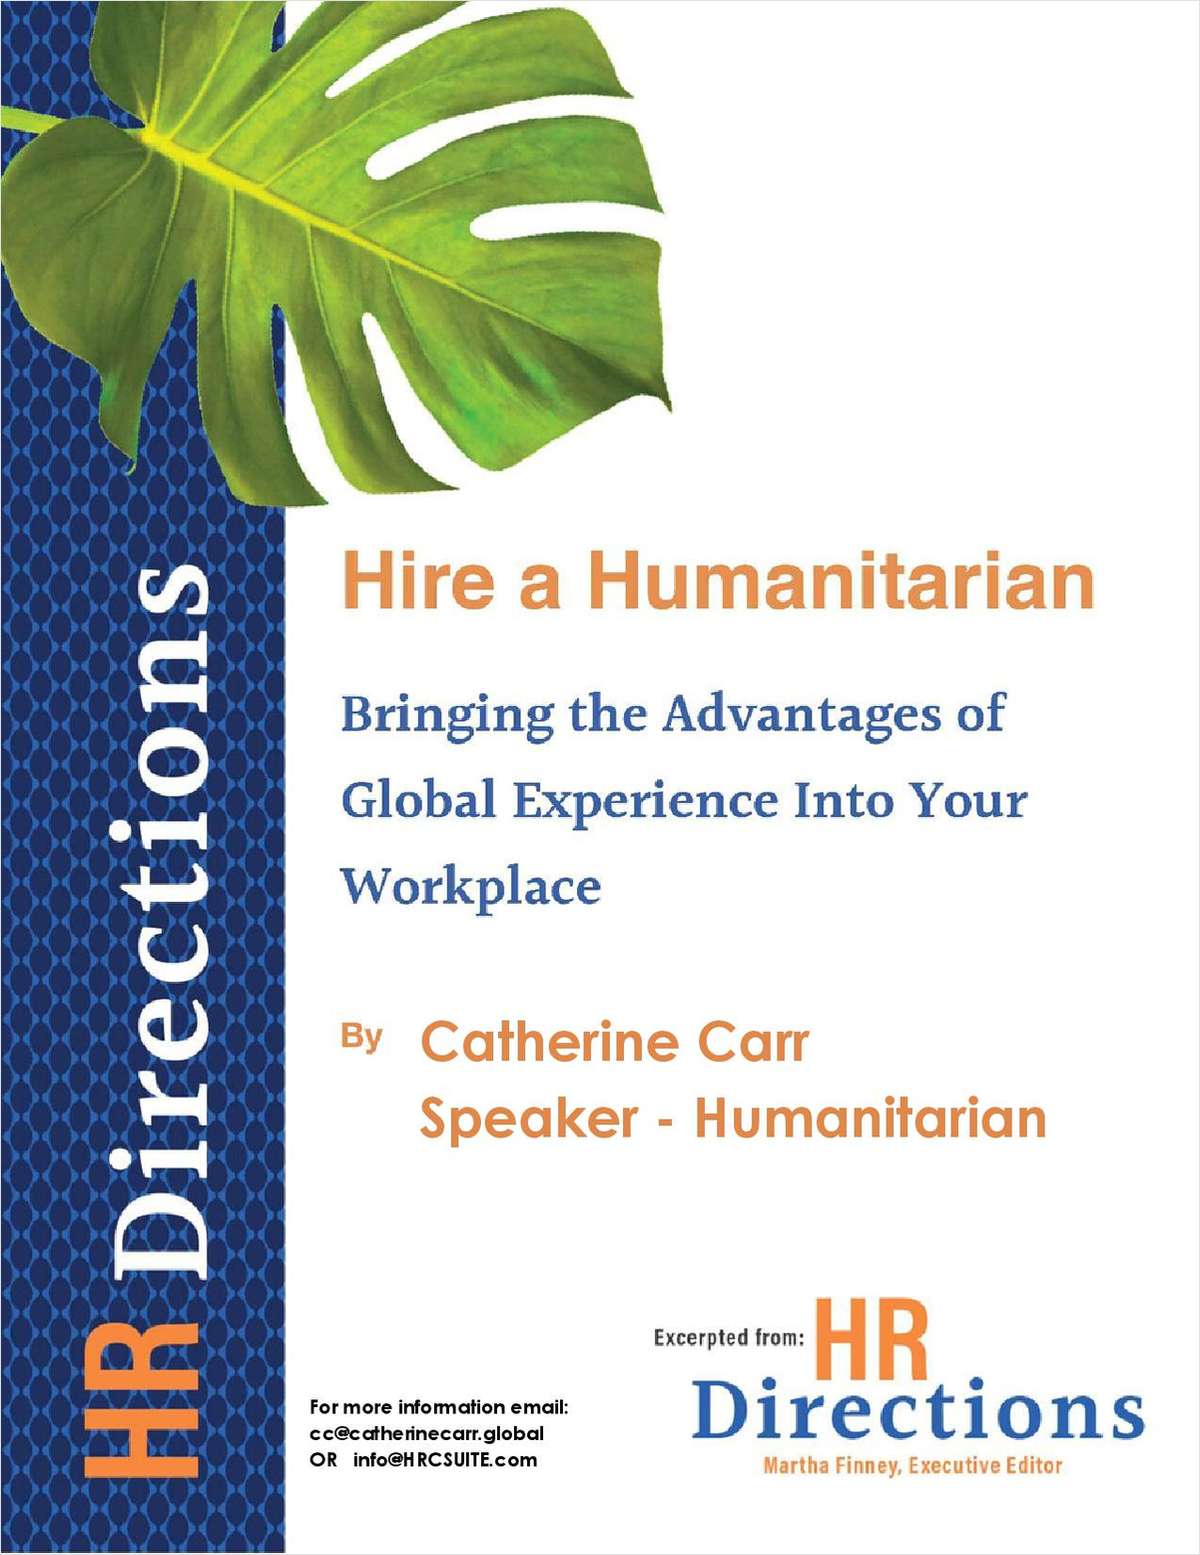 Hire a Humanitarian- HR Directions